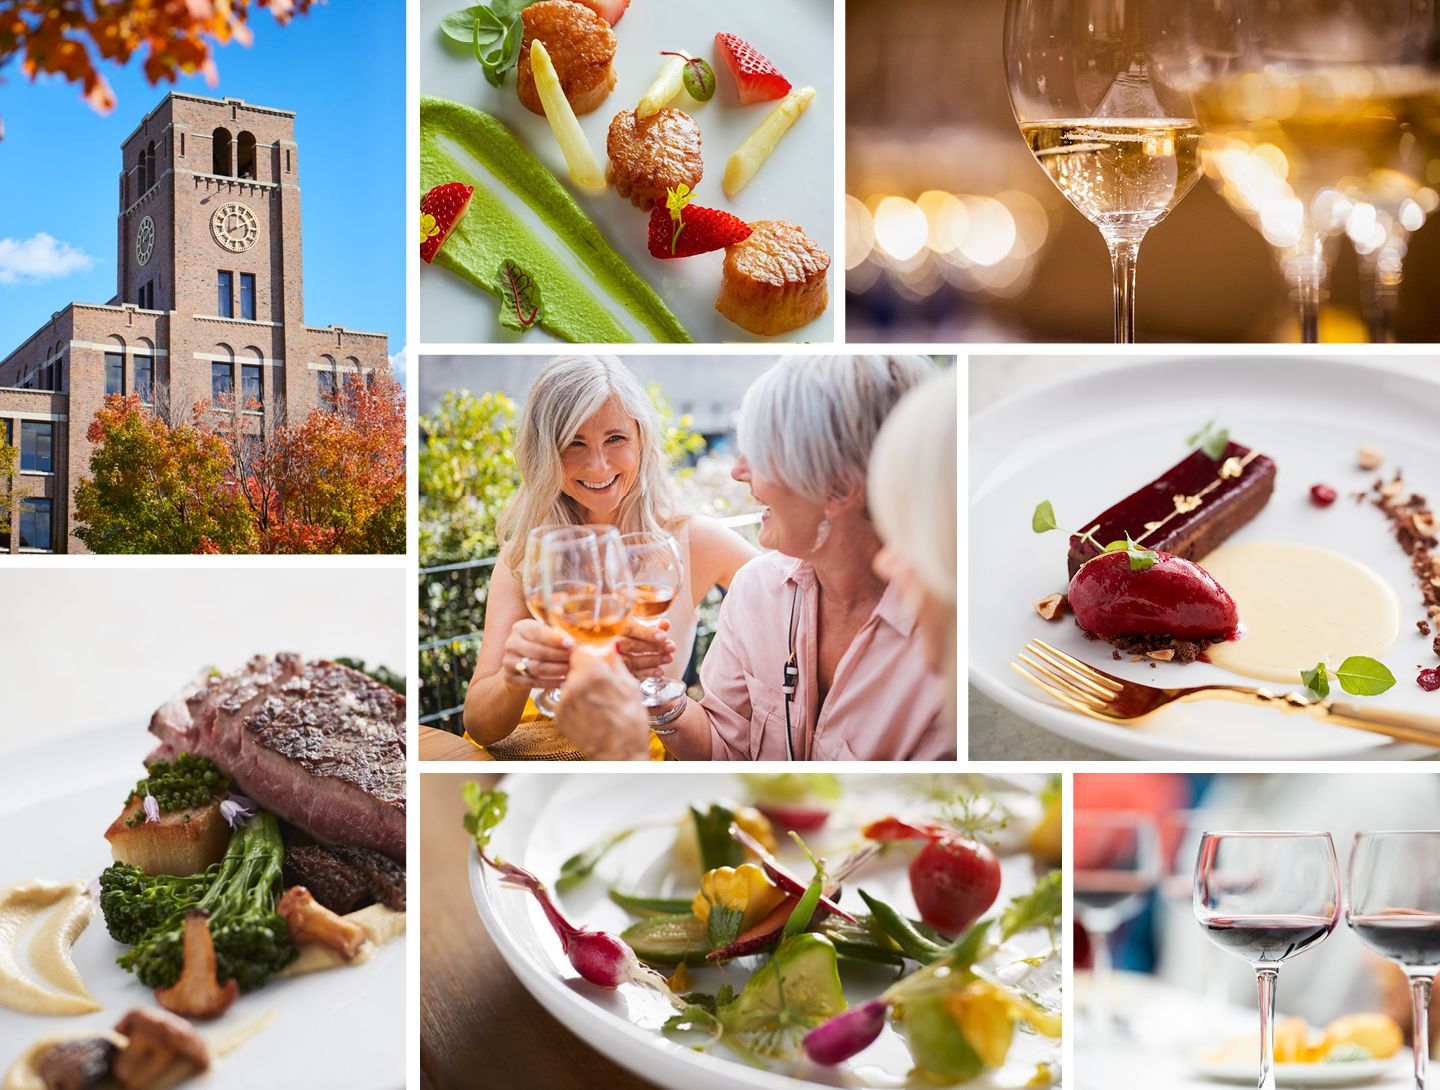 A grid of images that represent the Kohler Food & Wine event